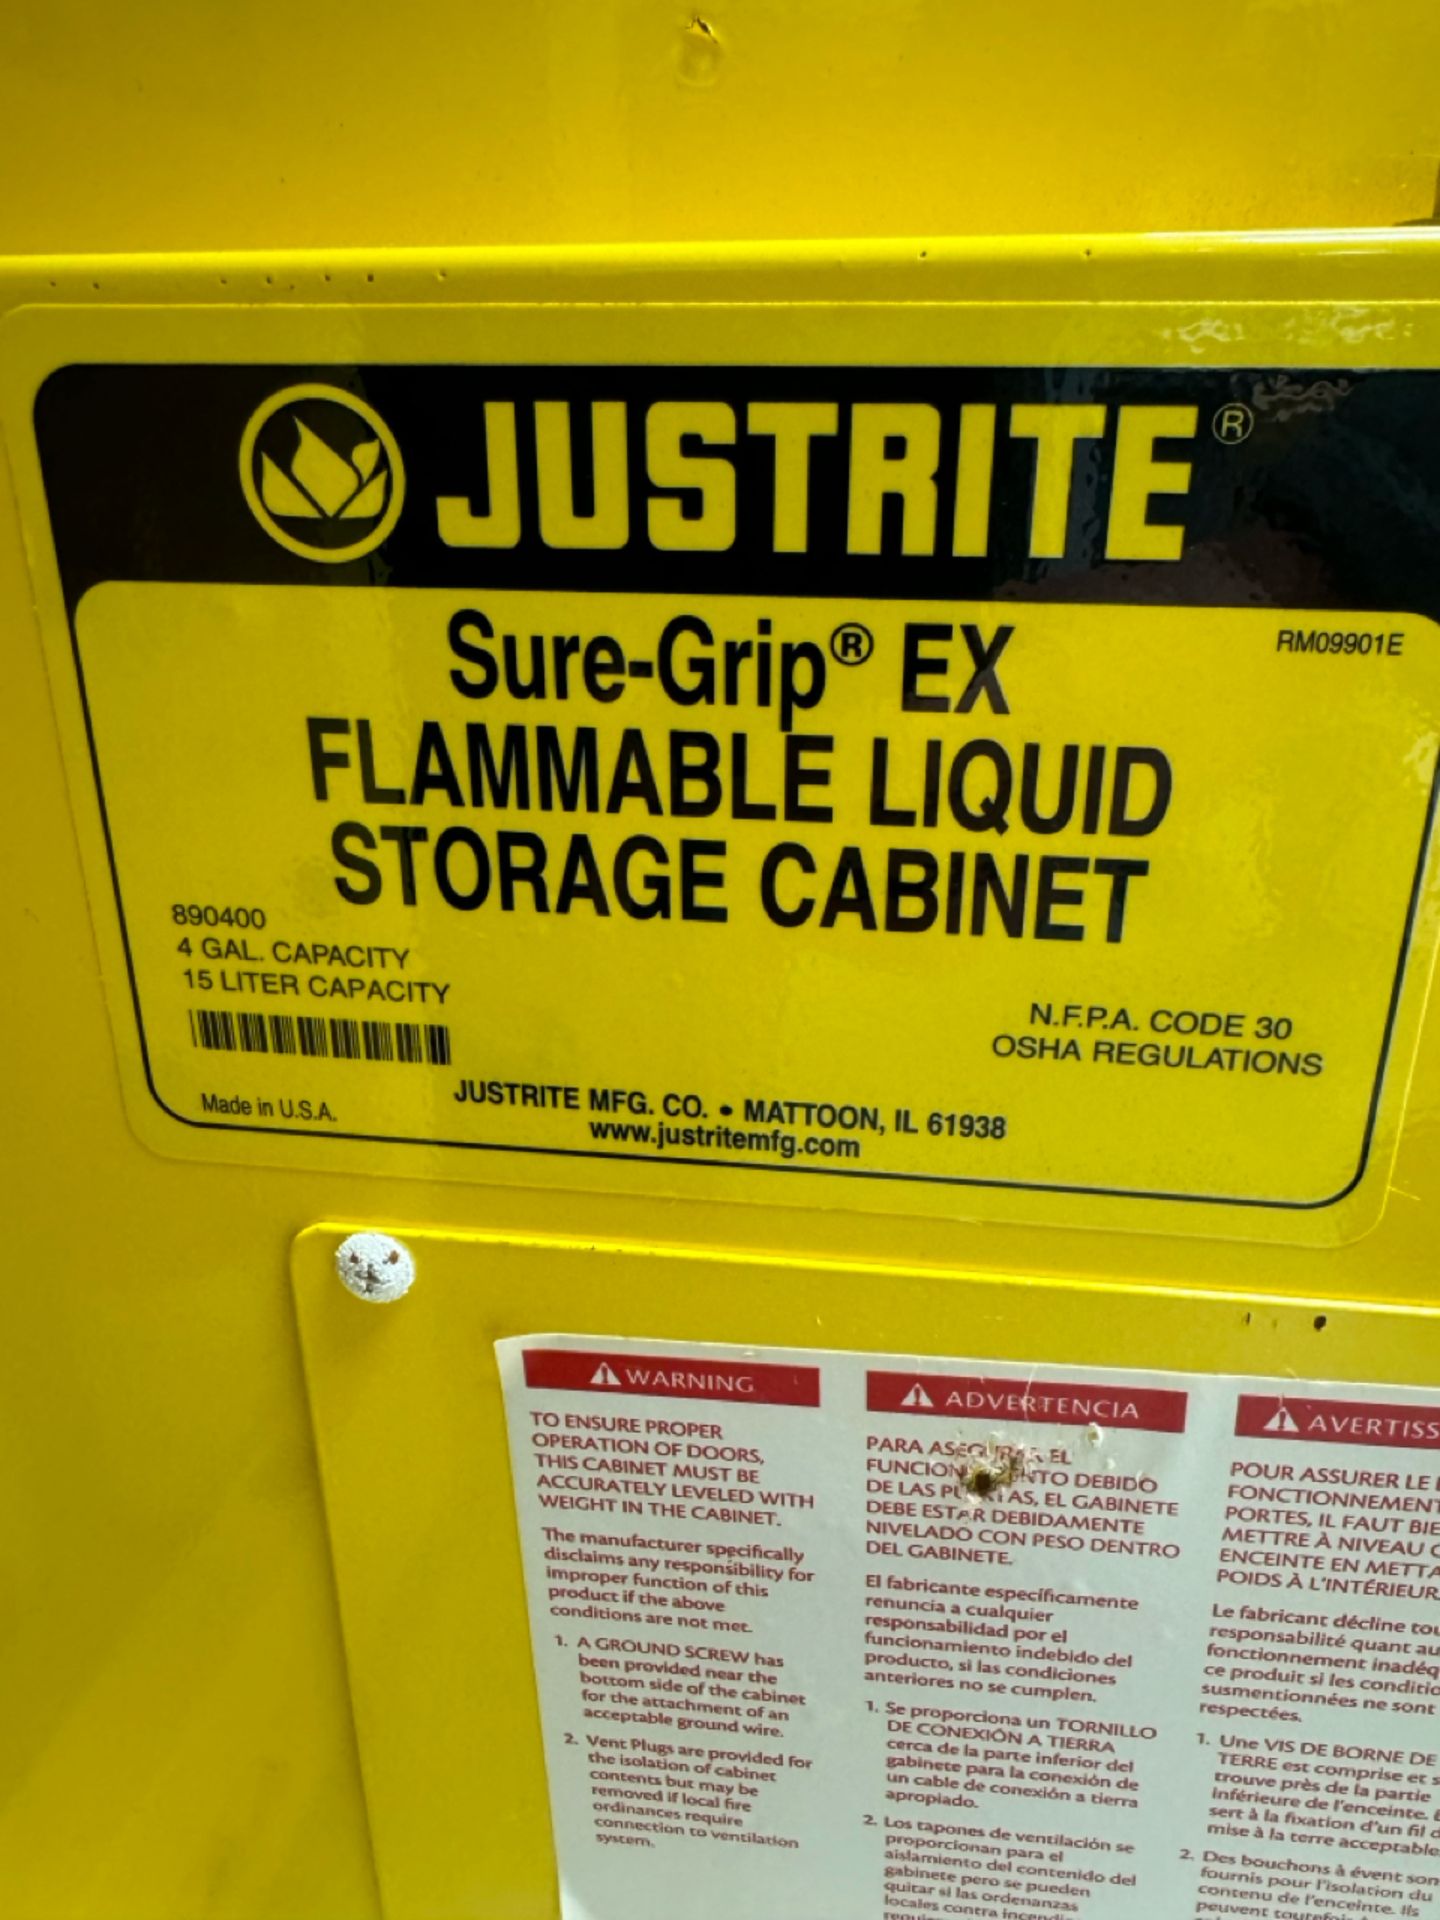 Just Rite Flammable Containment Cabinet - Image 3 of 6